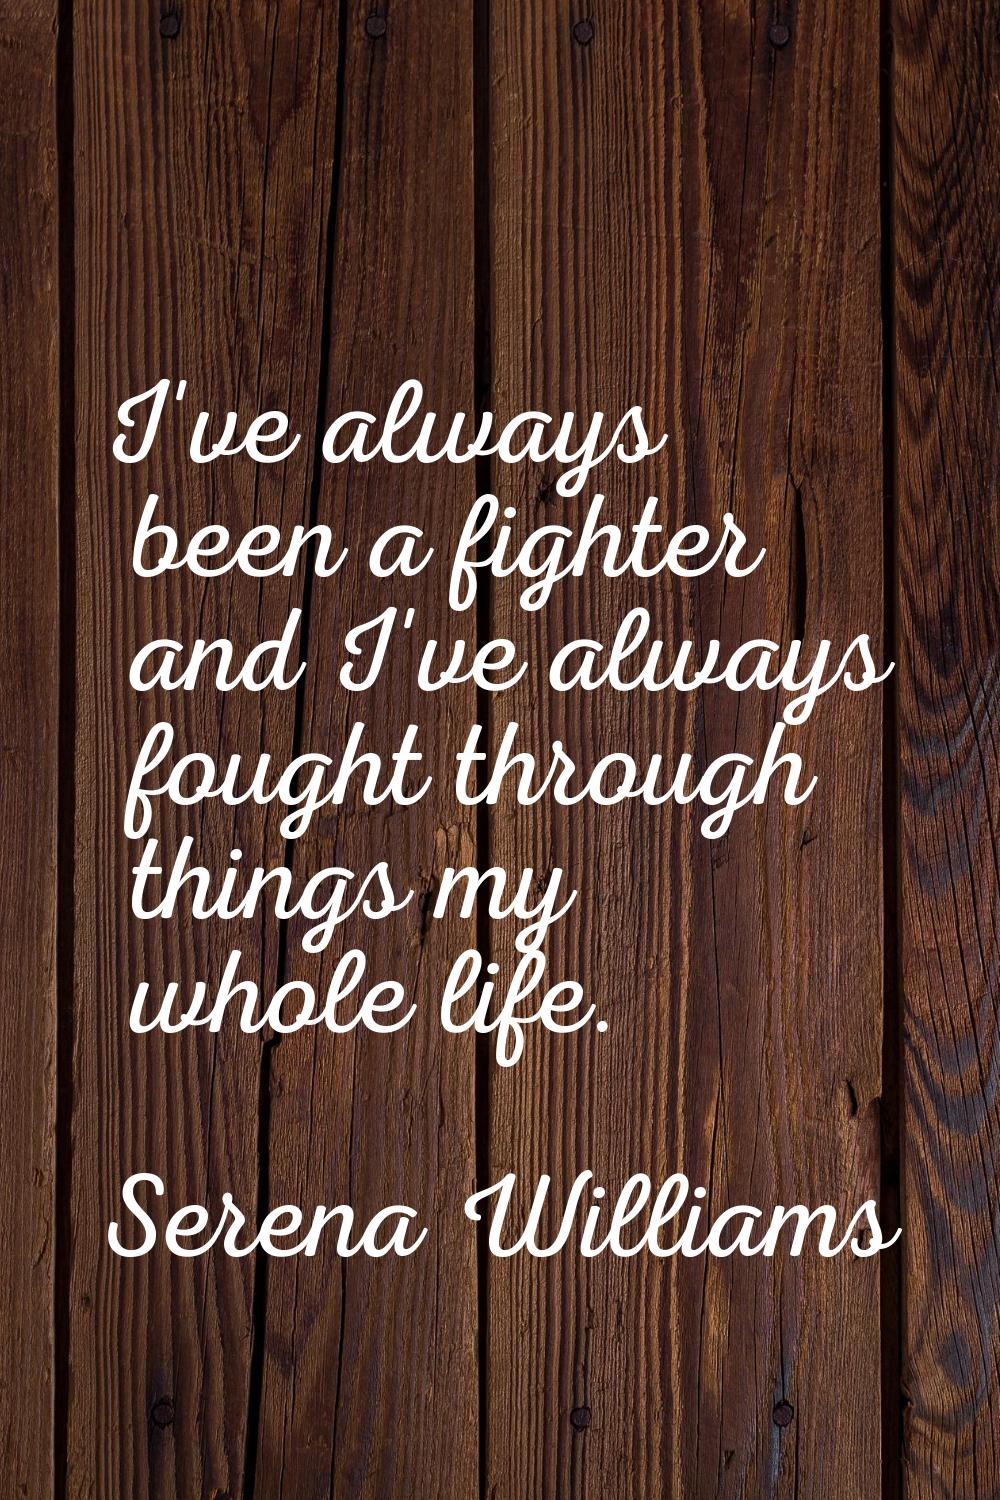 I've always been a fighter and I've always fought through things my whole life.